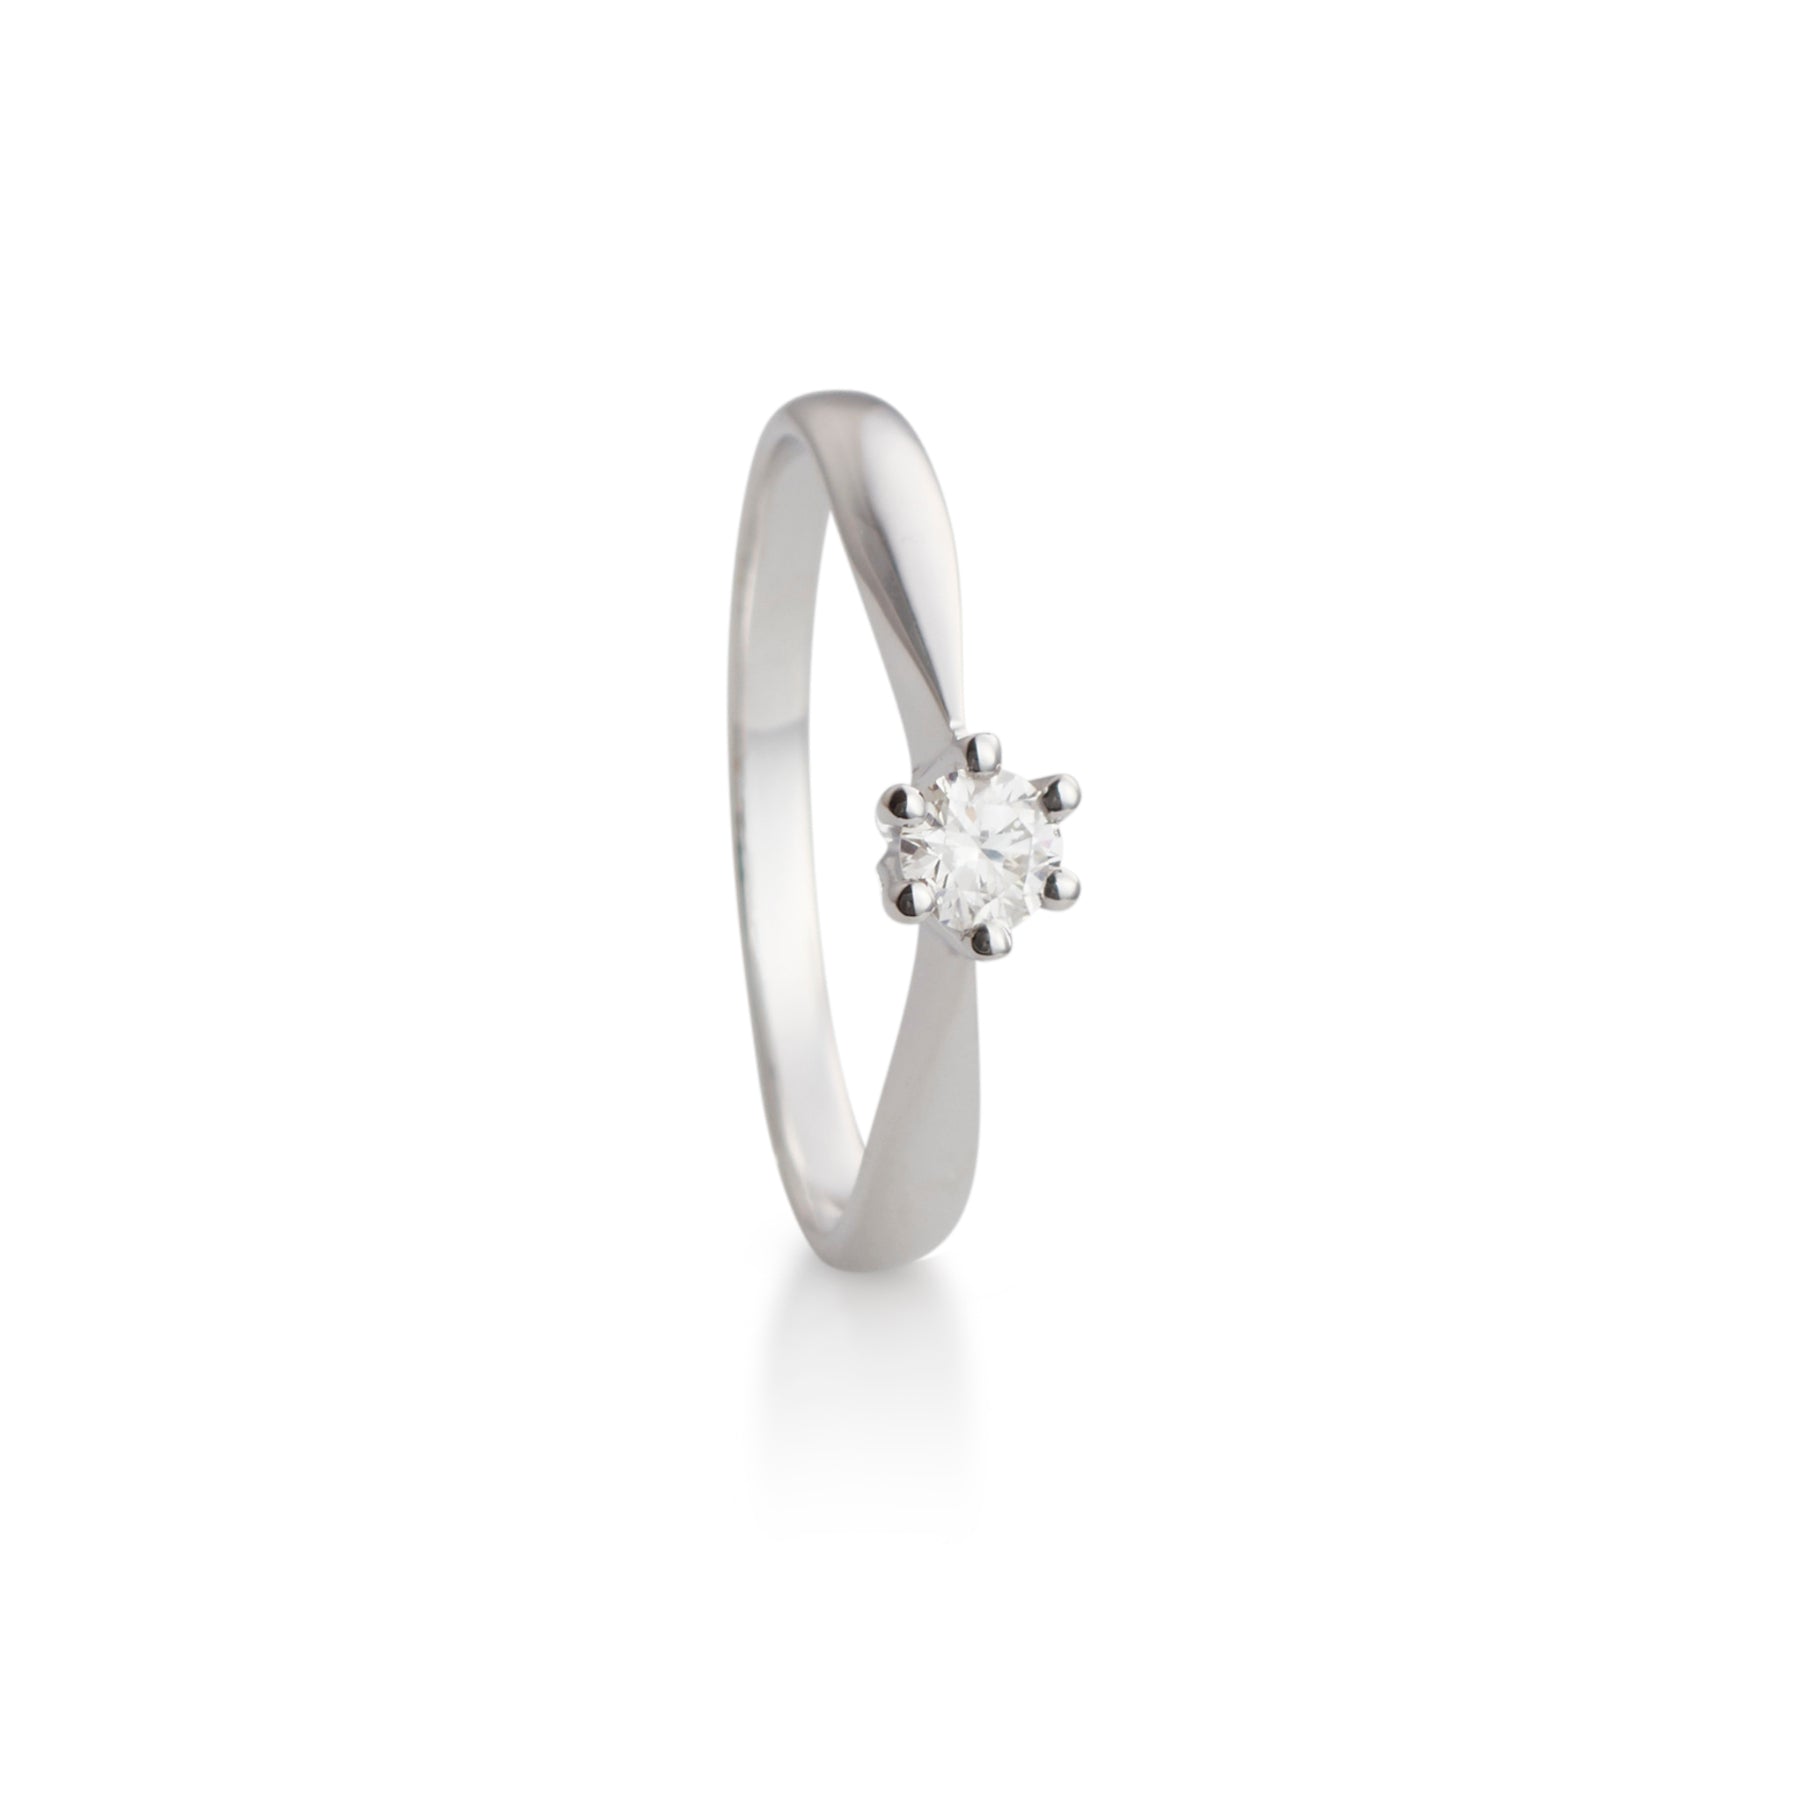 Marthe ring in white gold with diamond